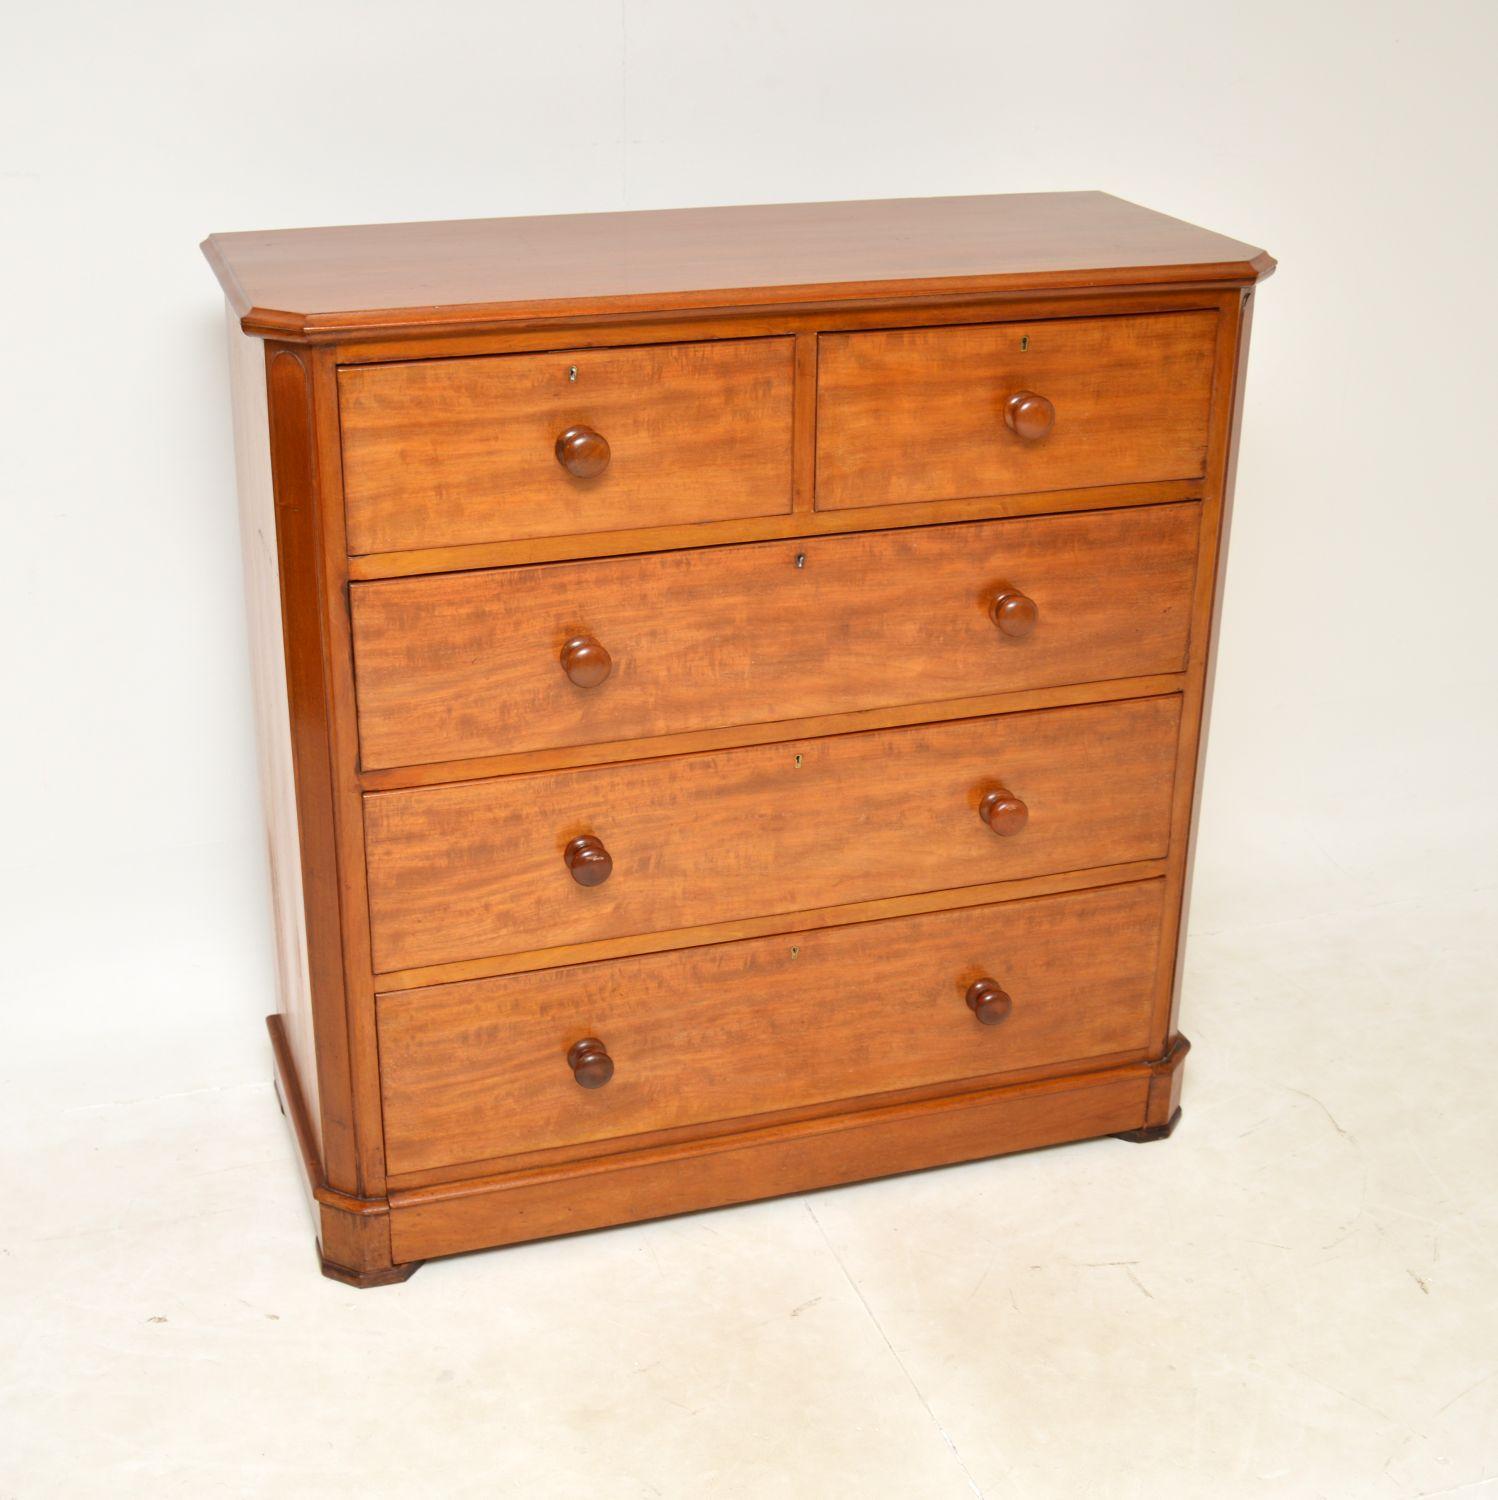 A large and very impressive antique Victorian chest of drawers. This was made in England, it dates from around the 1840-1860 period.

It is of superb quality, it is extremely well made with lots of storage space inside the generous drawers. The